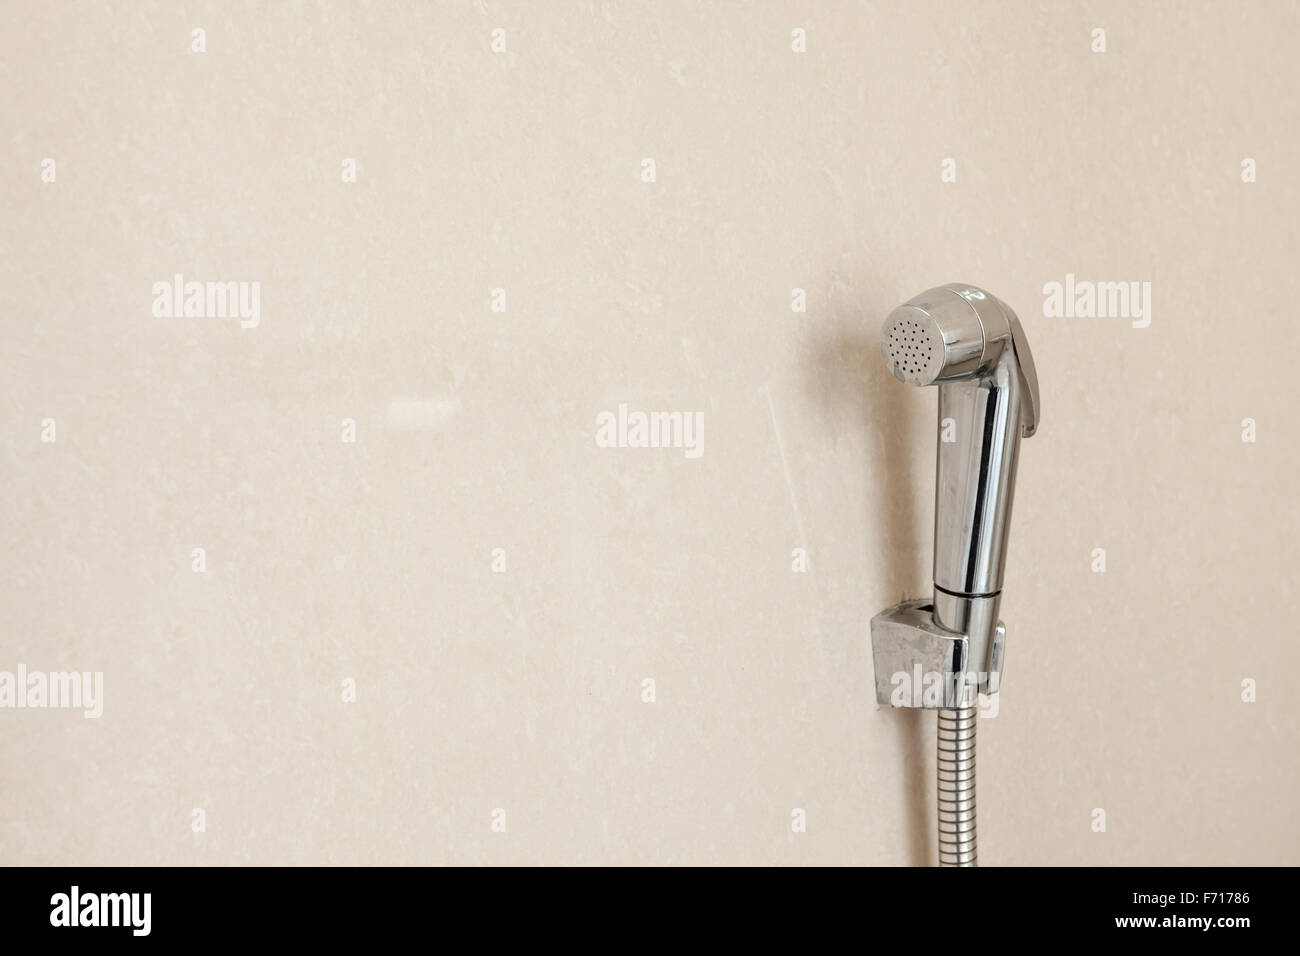 on the wall hangs a Bidet Toilet Water spray or an toilet nozzle Stock Photo